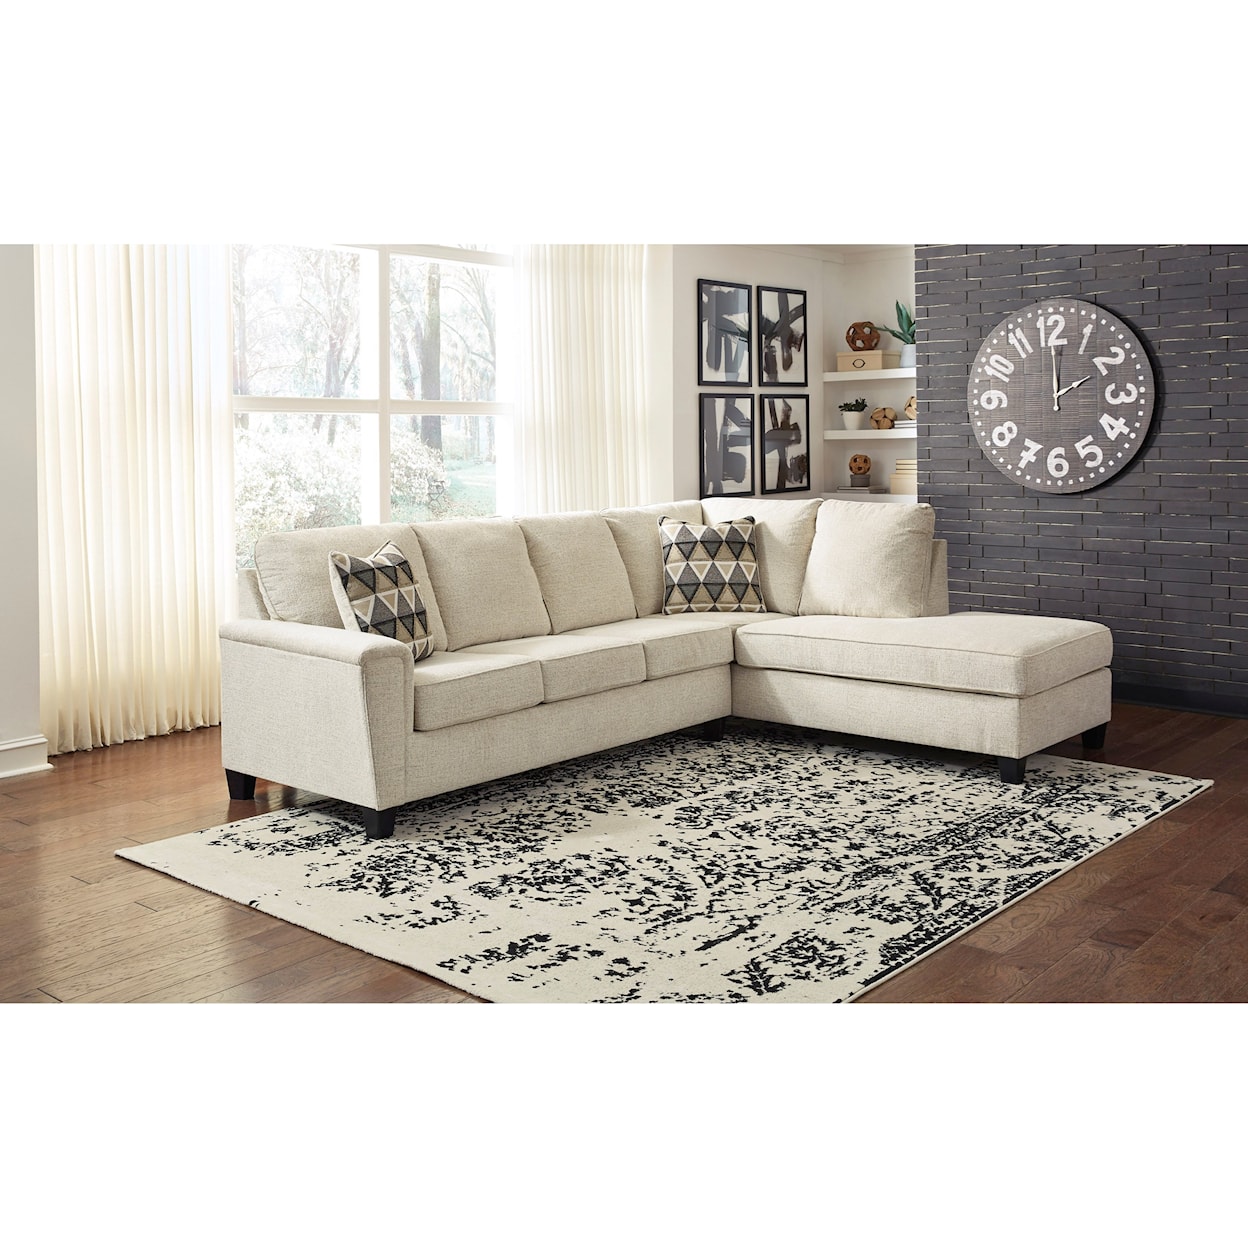 StyleLine Abinger 2-Piece Sectional w/ Chaise